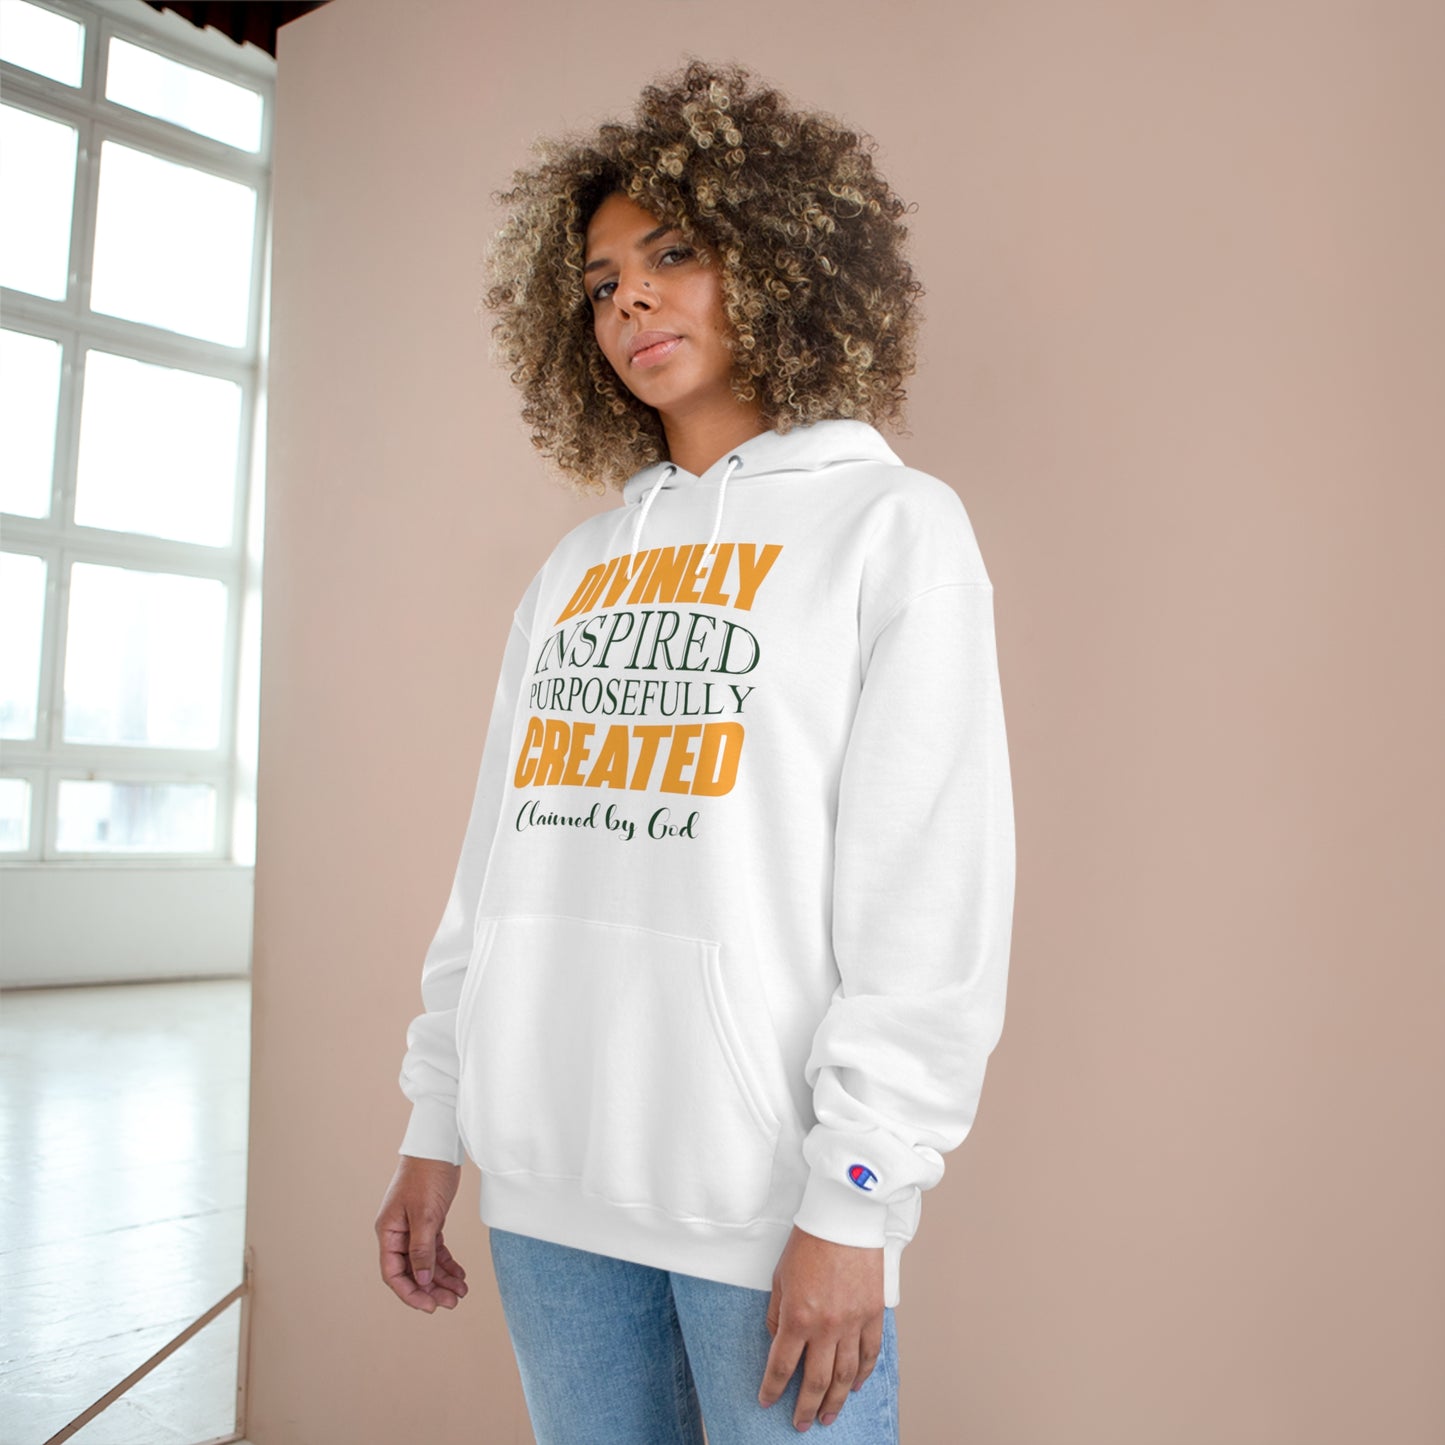 Divinely Inspired Purposefully Created Unisex Champion Hoodie